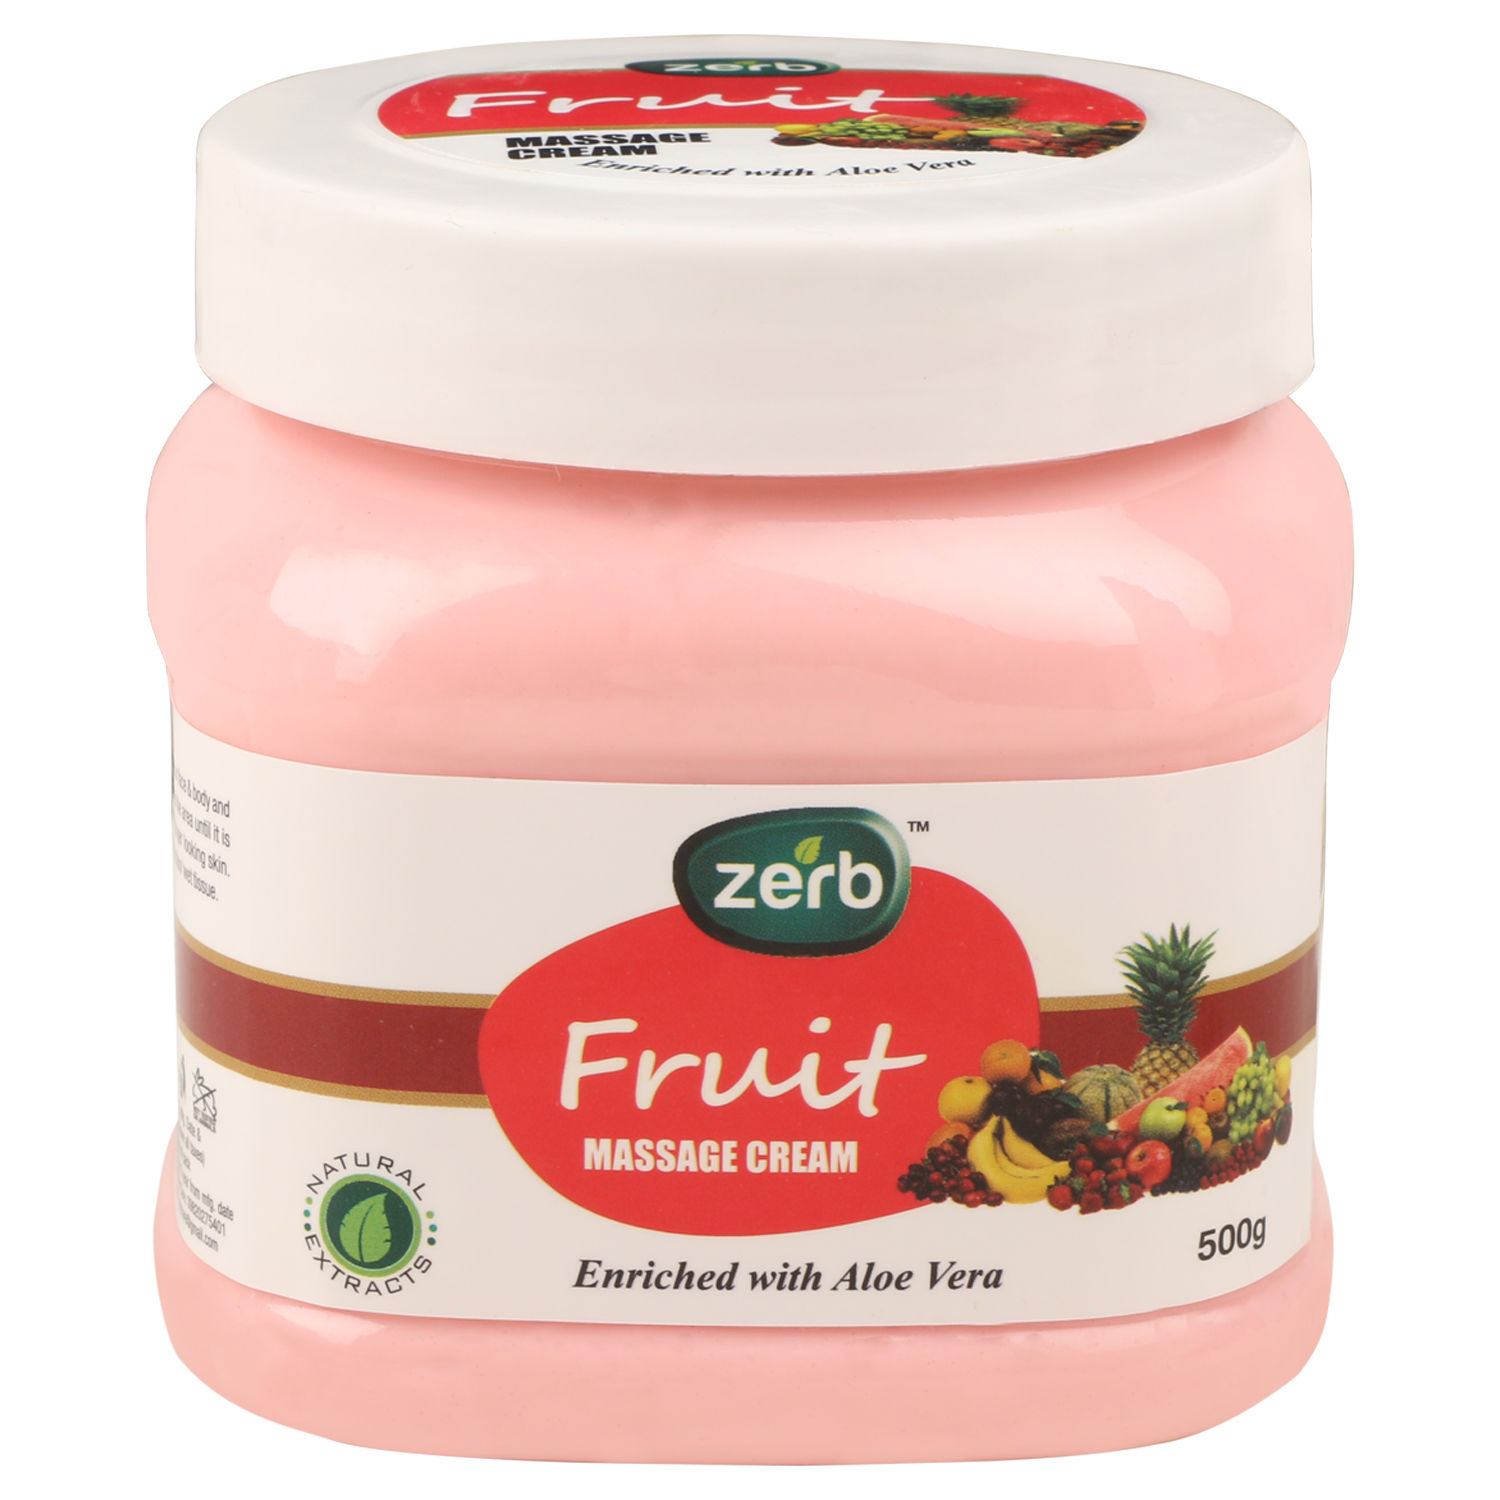 Buy Zerb Fruit Face And Body Massage Cream For Softer And Smoother Glowing Skin (500 g) - Purplle